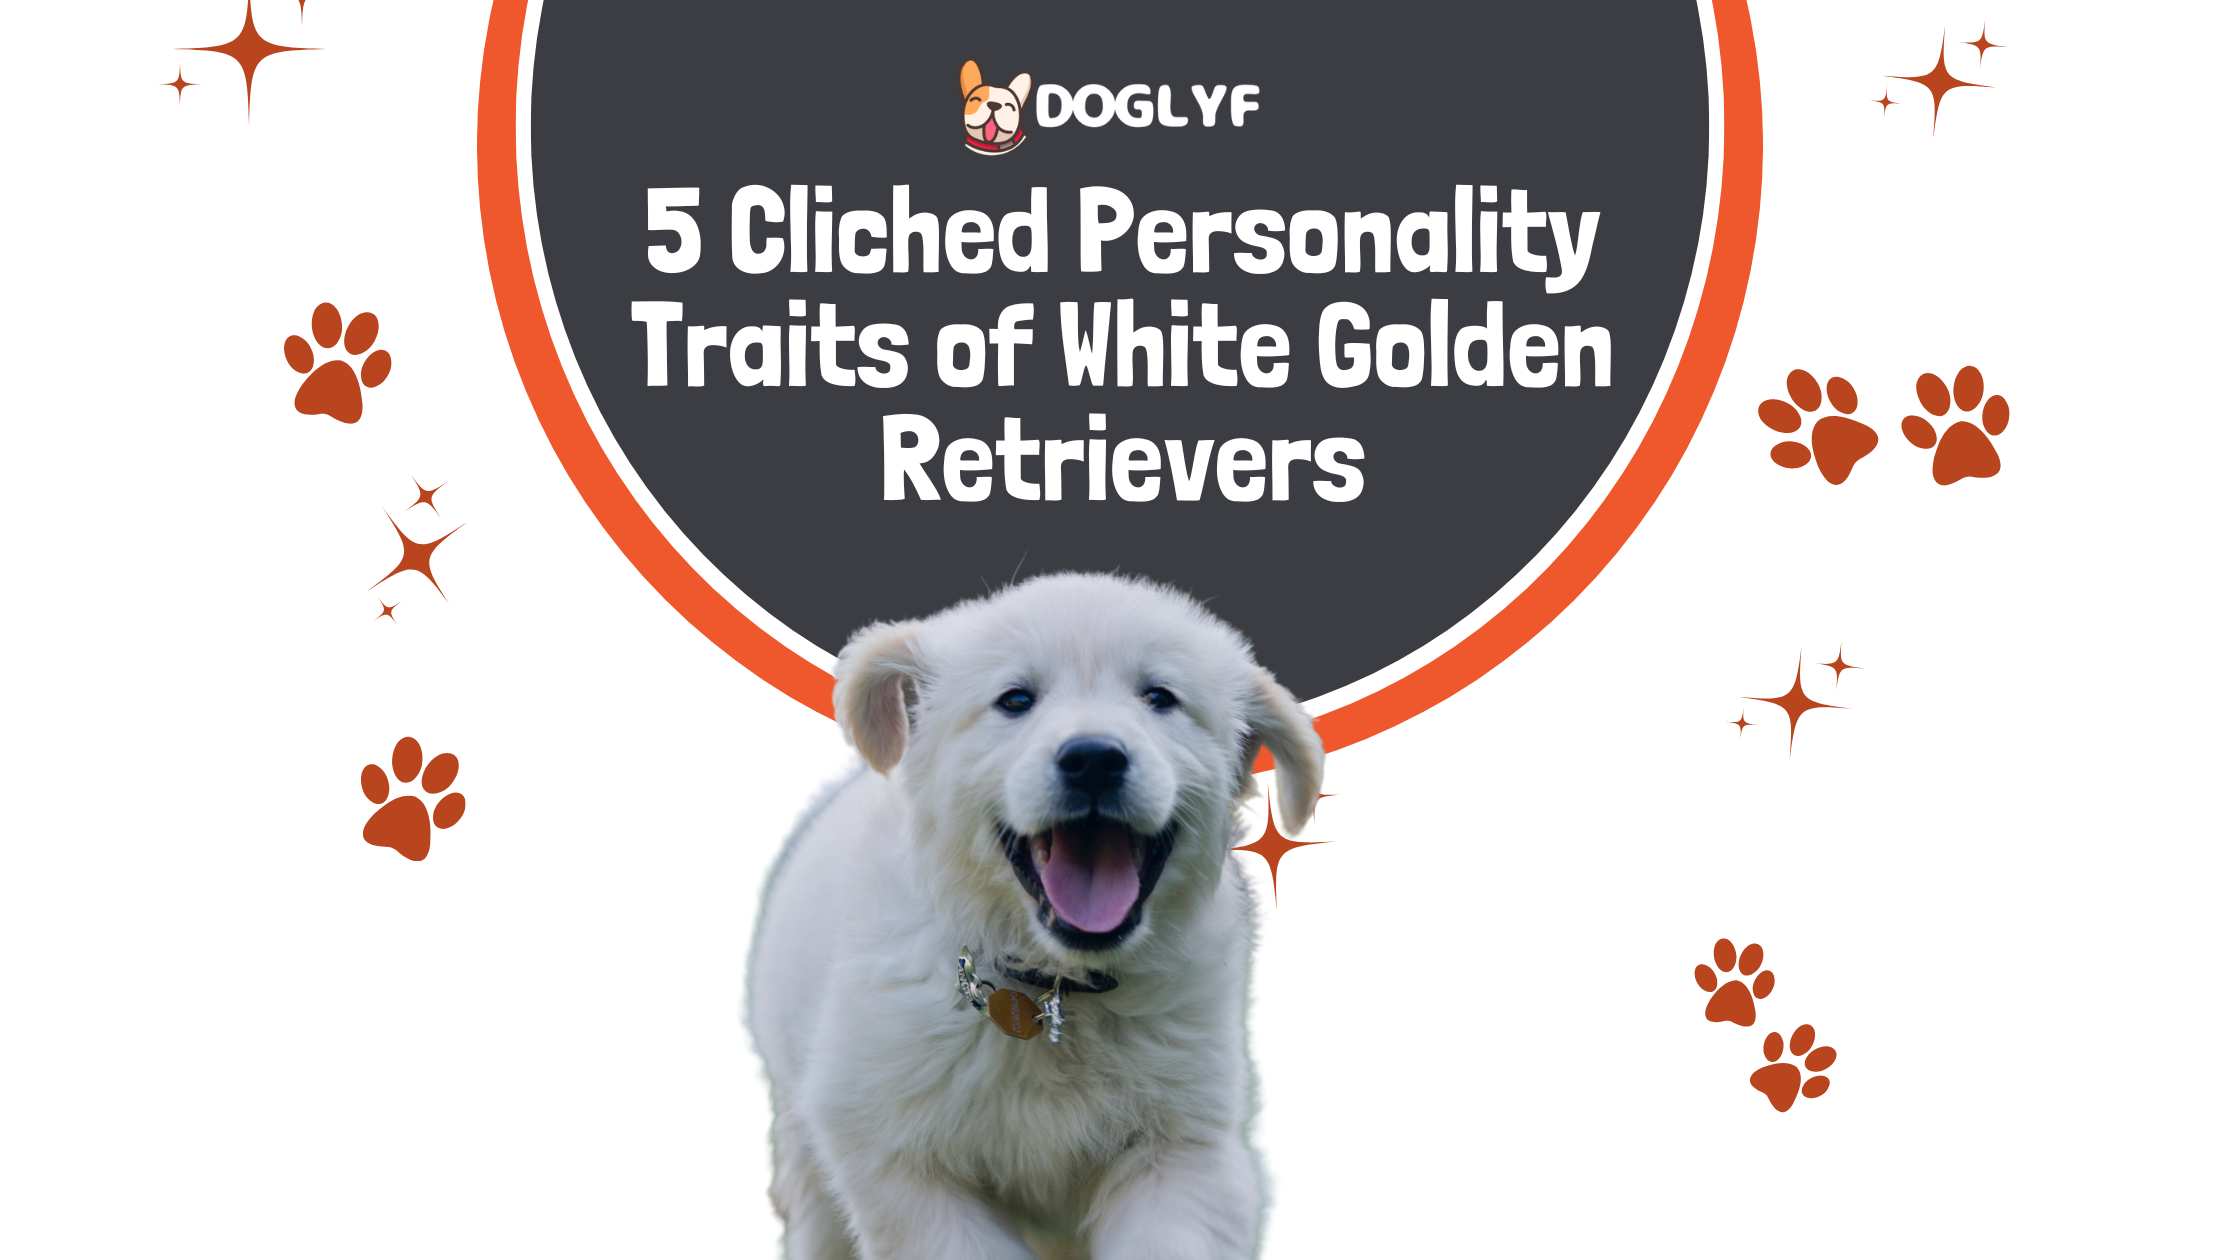 5 Cliched Personality Traits of White Golden Retrievers